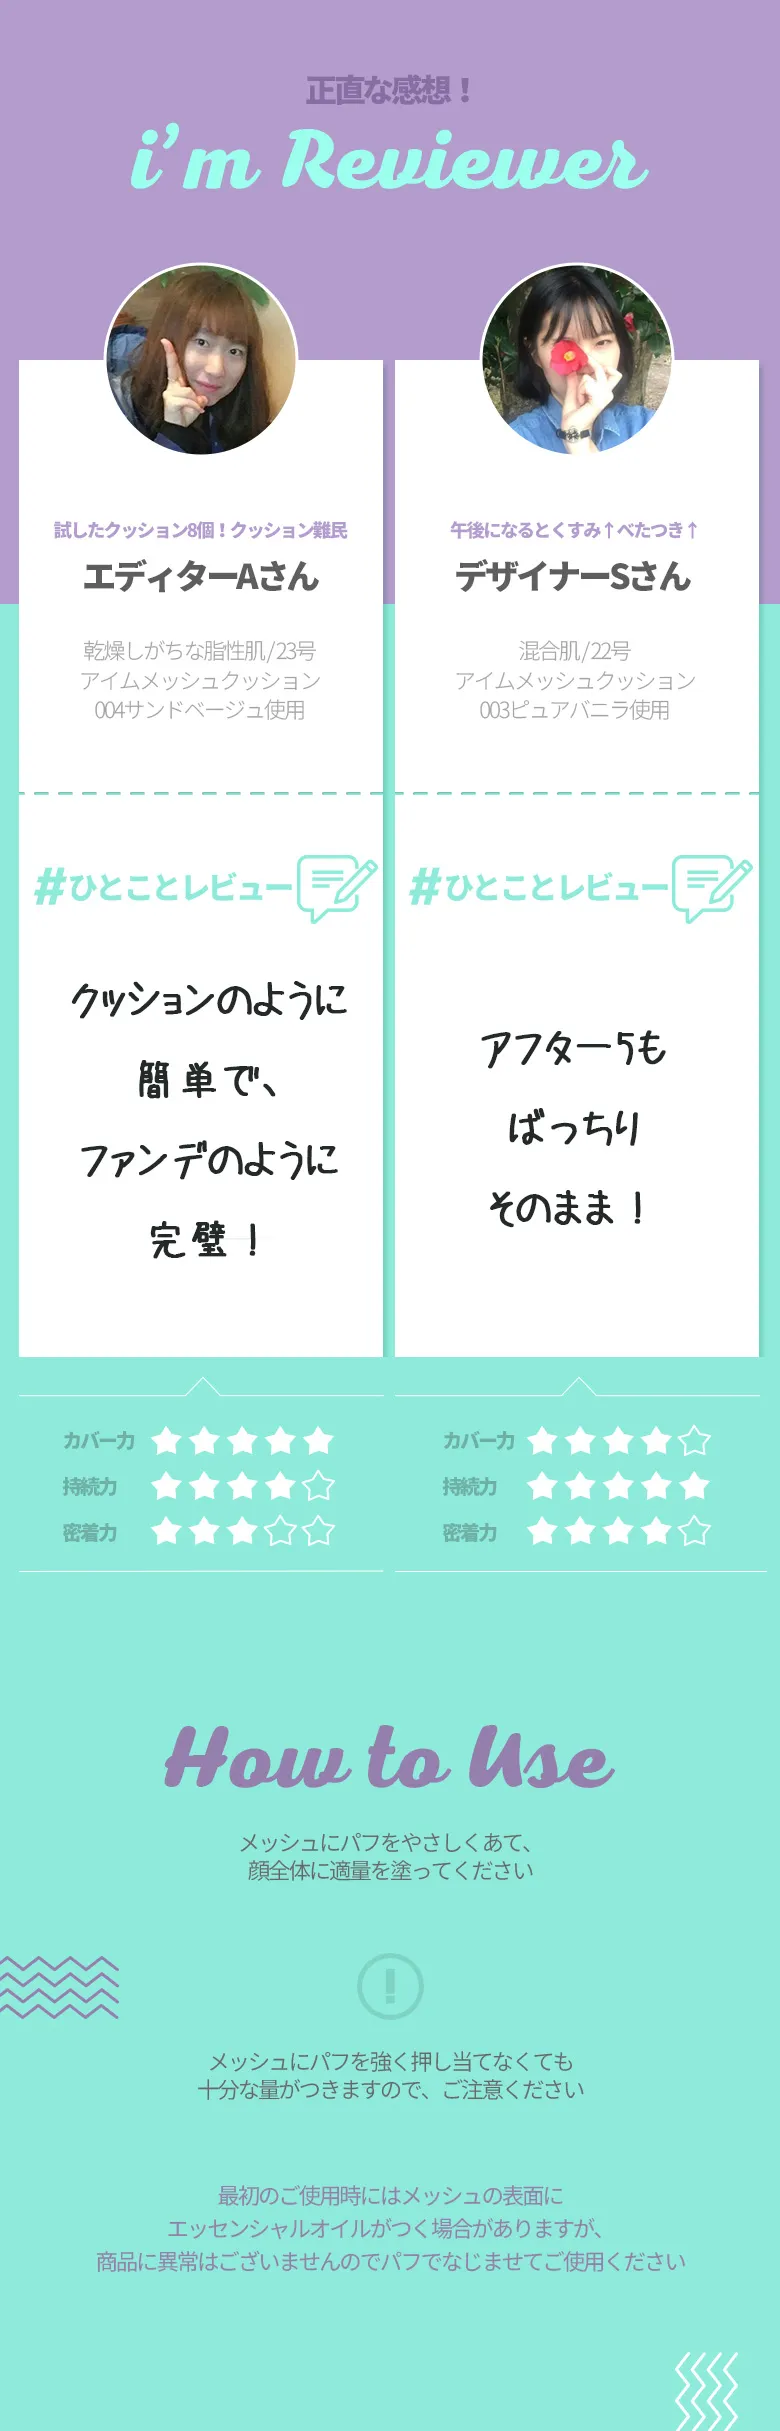 <font color=red><b>⭐︎限定セール⭐︎</b></font>[アイムミミ]アイムメッシュクッション | 詳細画像5